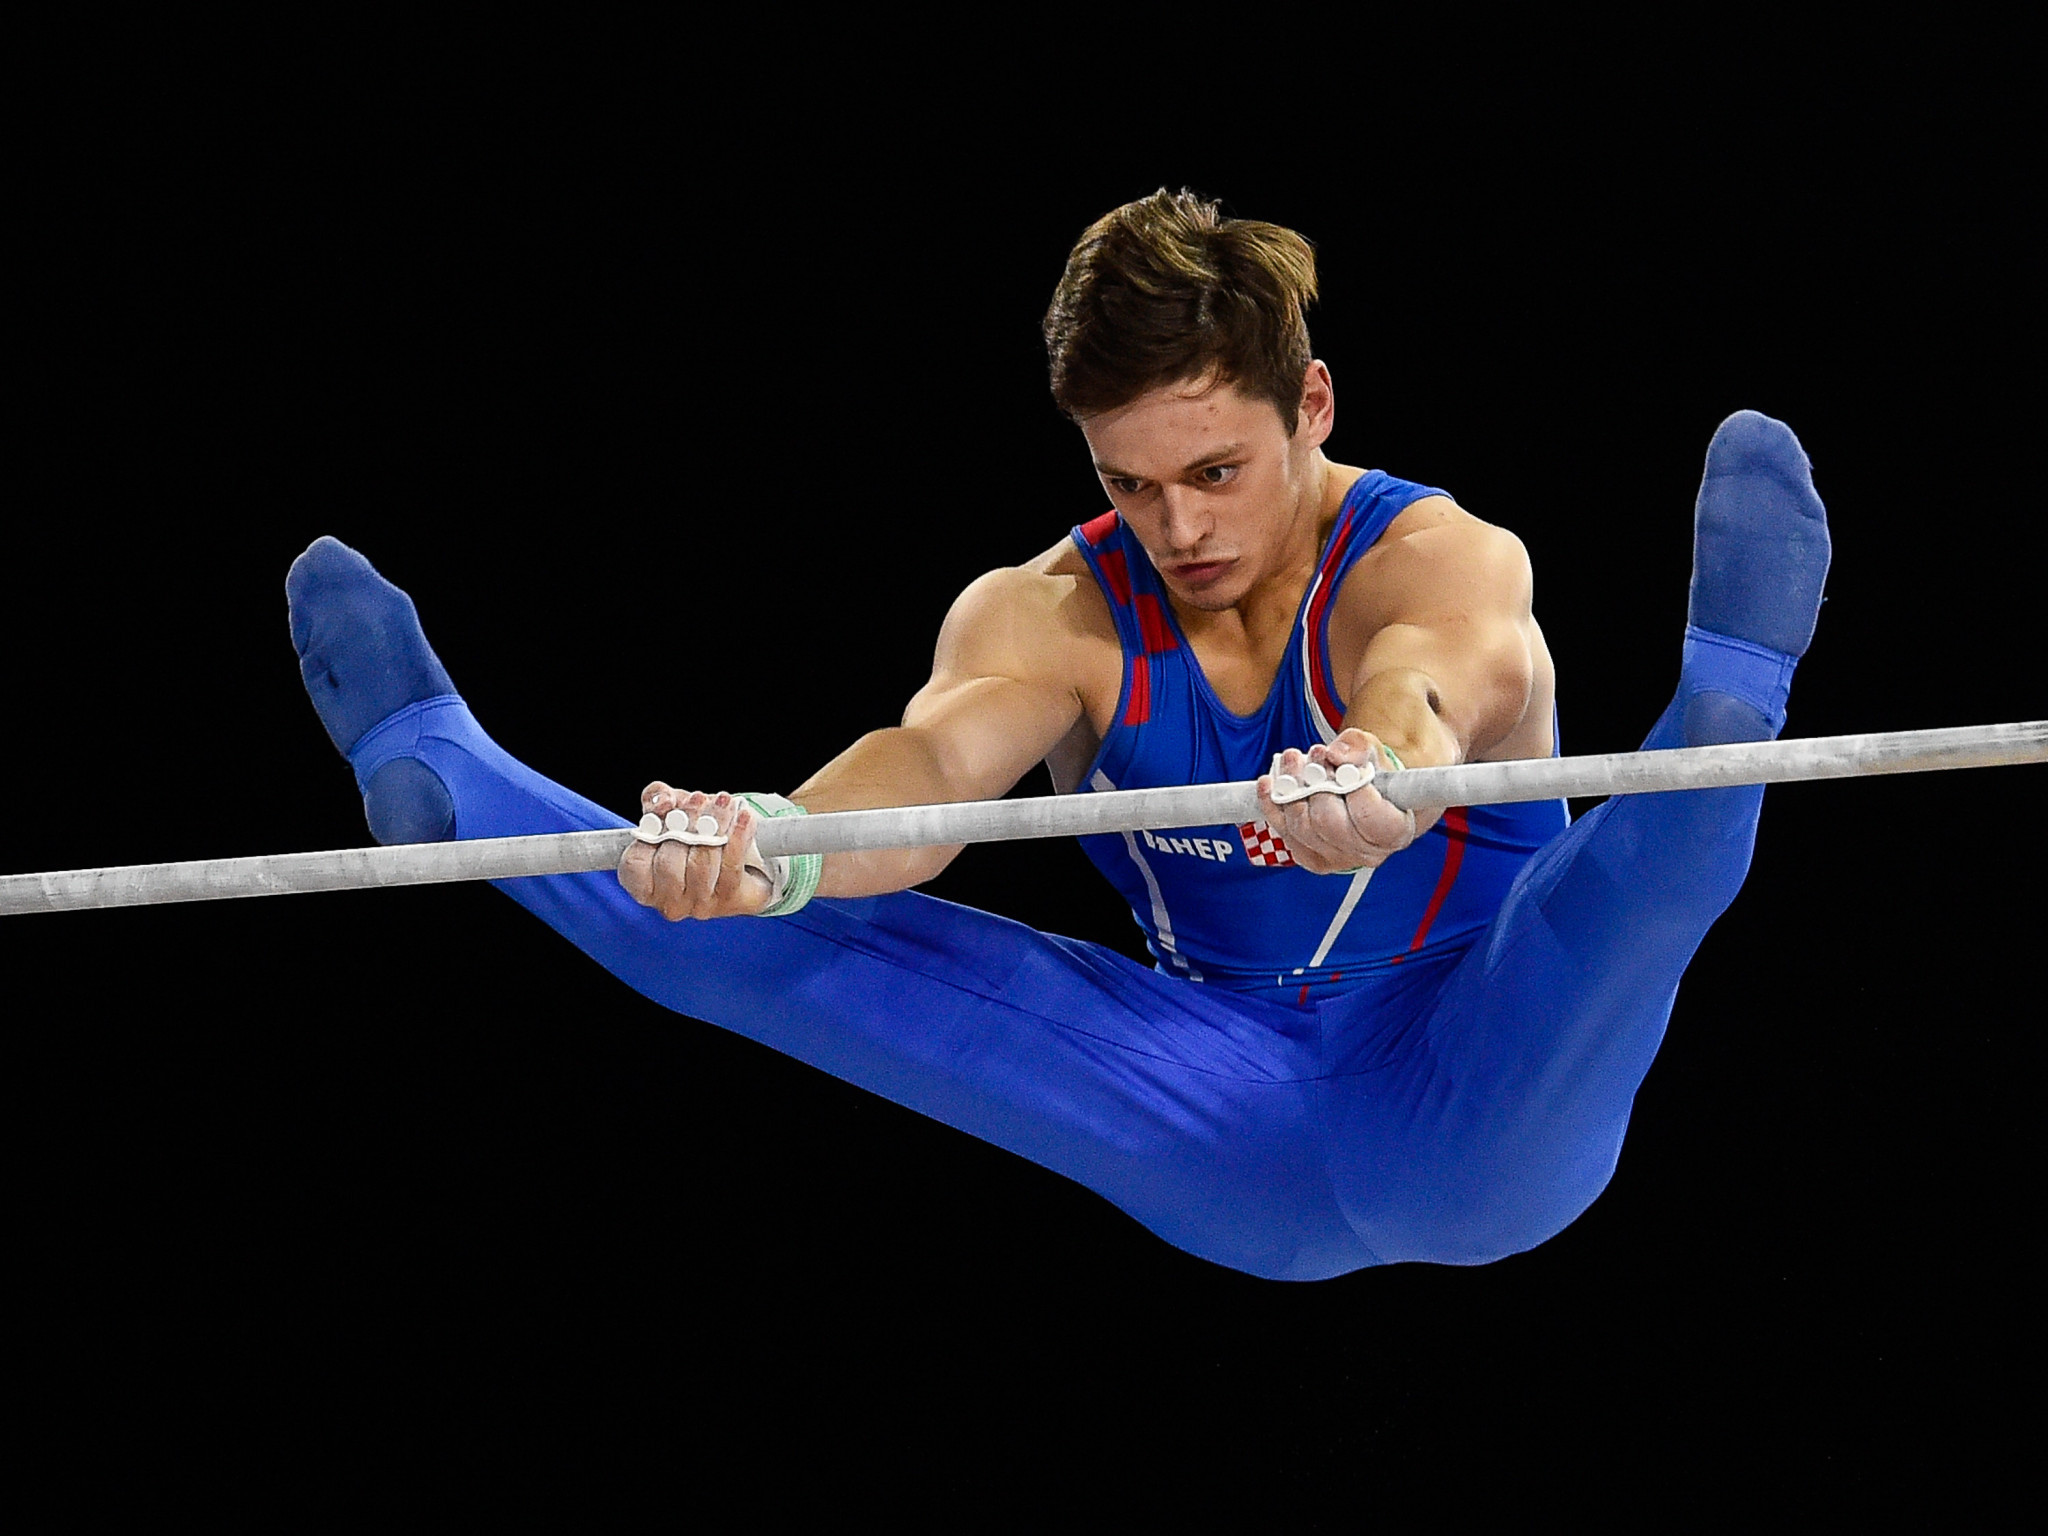 Tin Srbić enjoyed home success in the horizontal bar final ©Getty Images